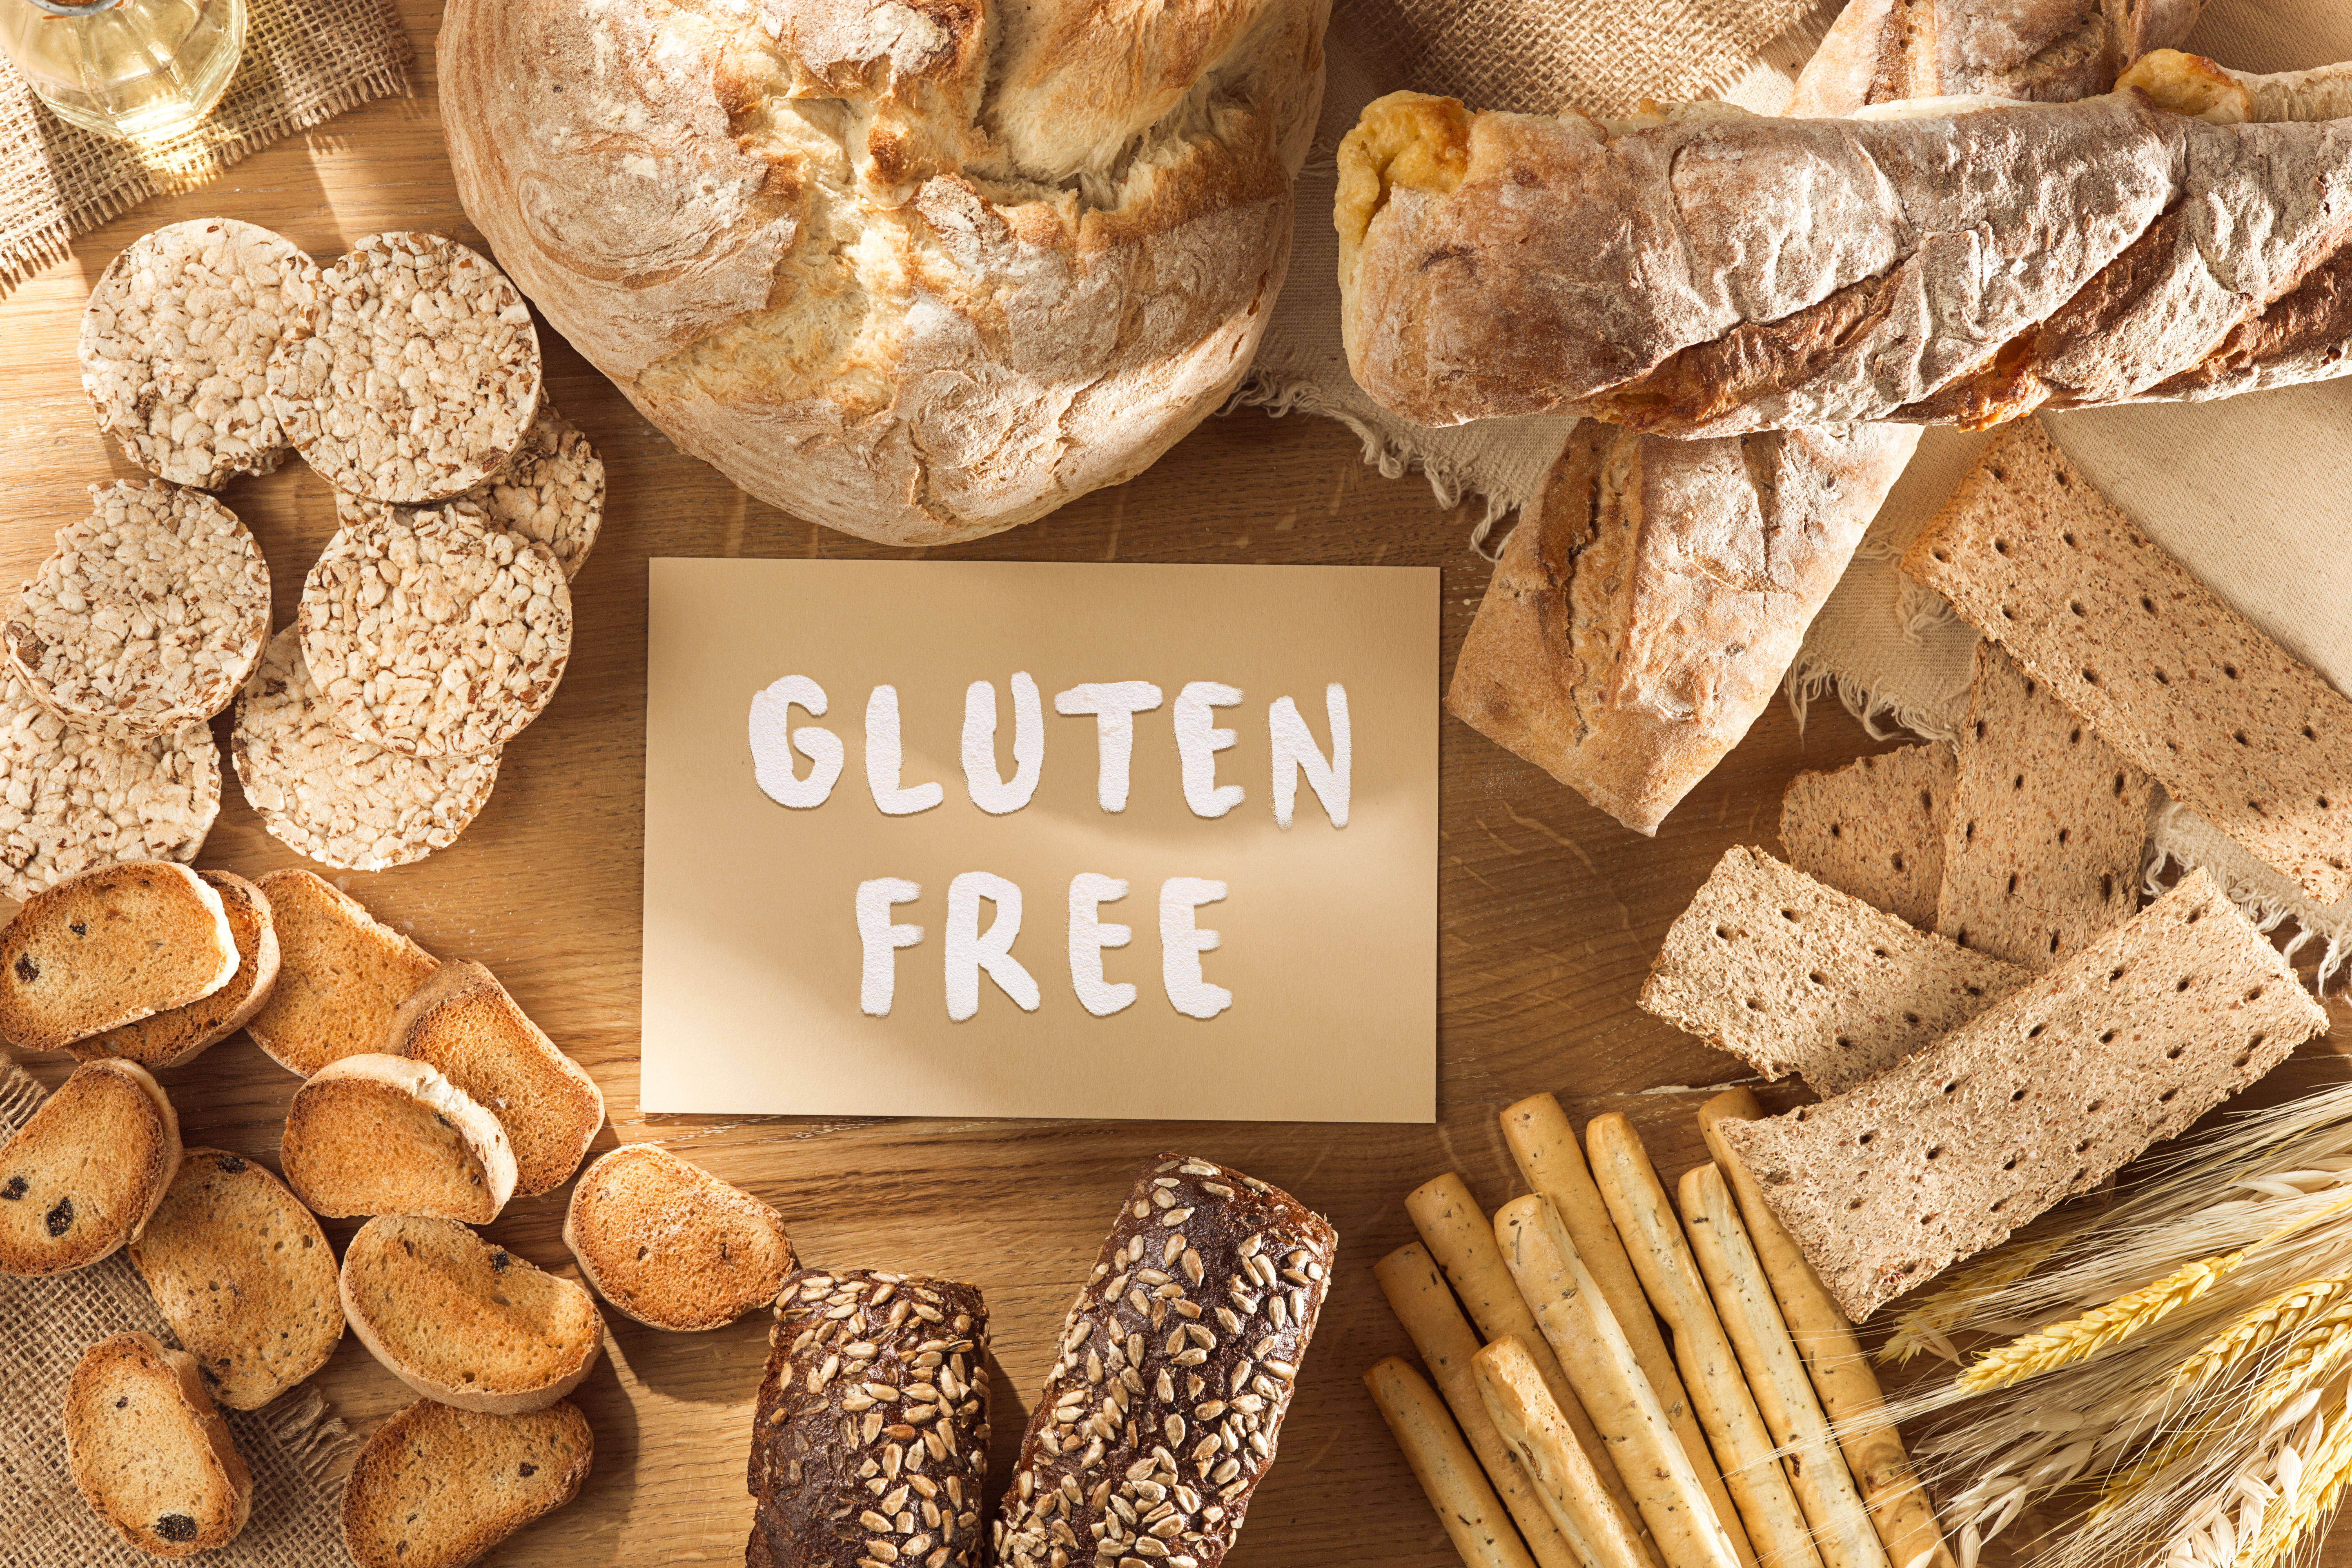 Gluten free food. Various pasta, bread and snacks on wooden background from top view